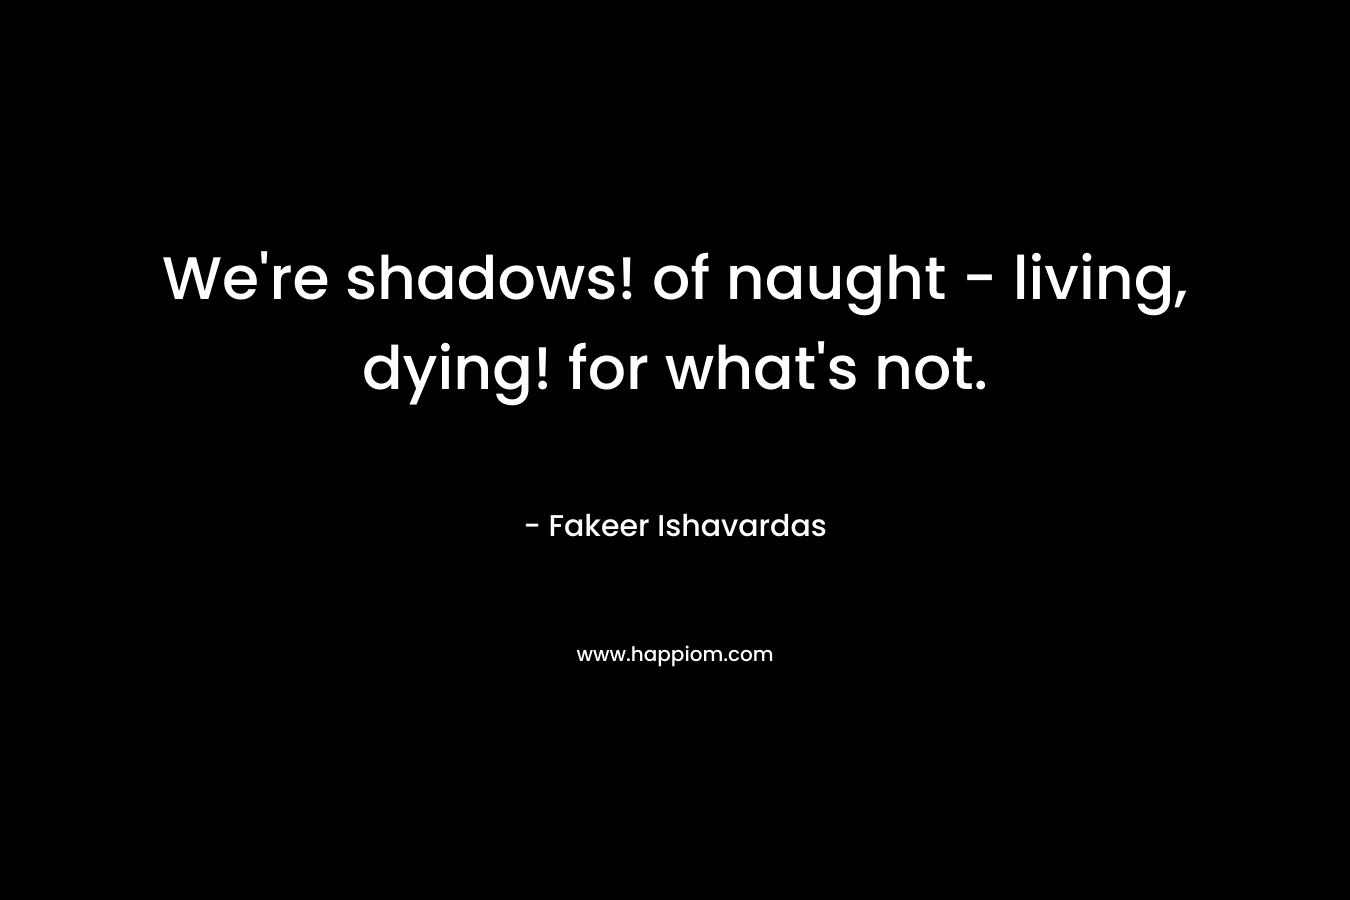 We’re shadows! of naught – living, dying! for what’s not. – Fakeer Ishavardas